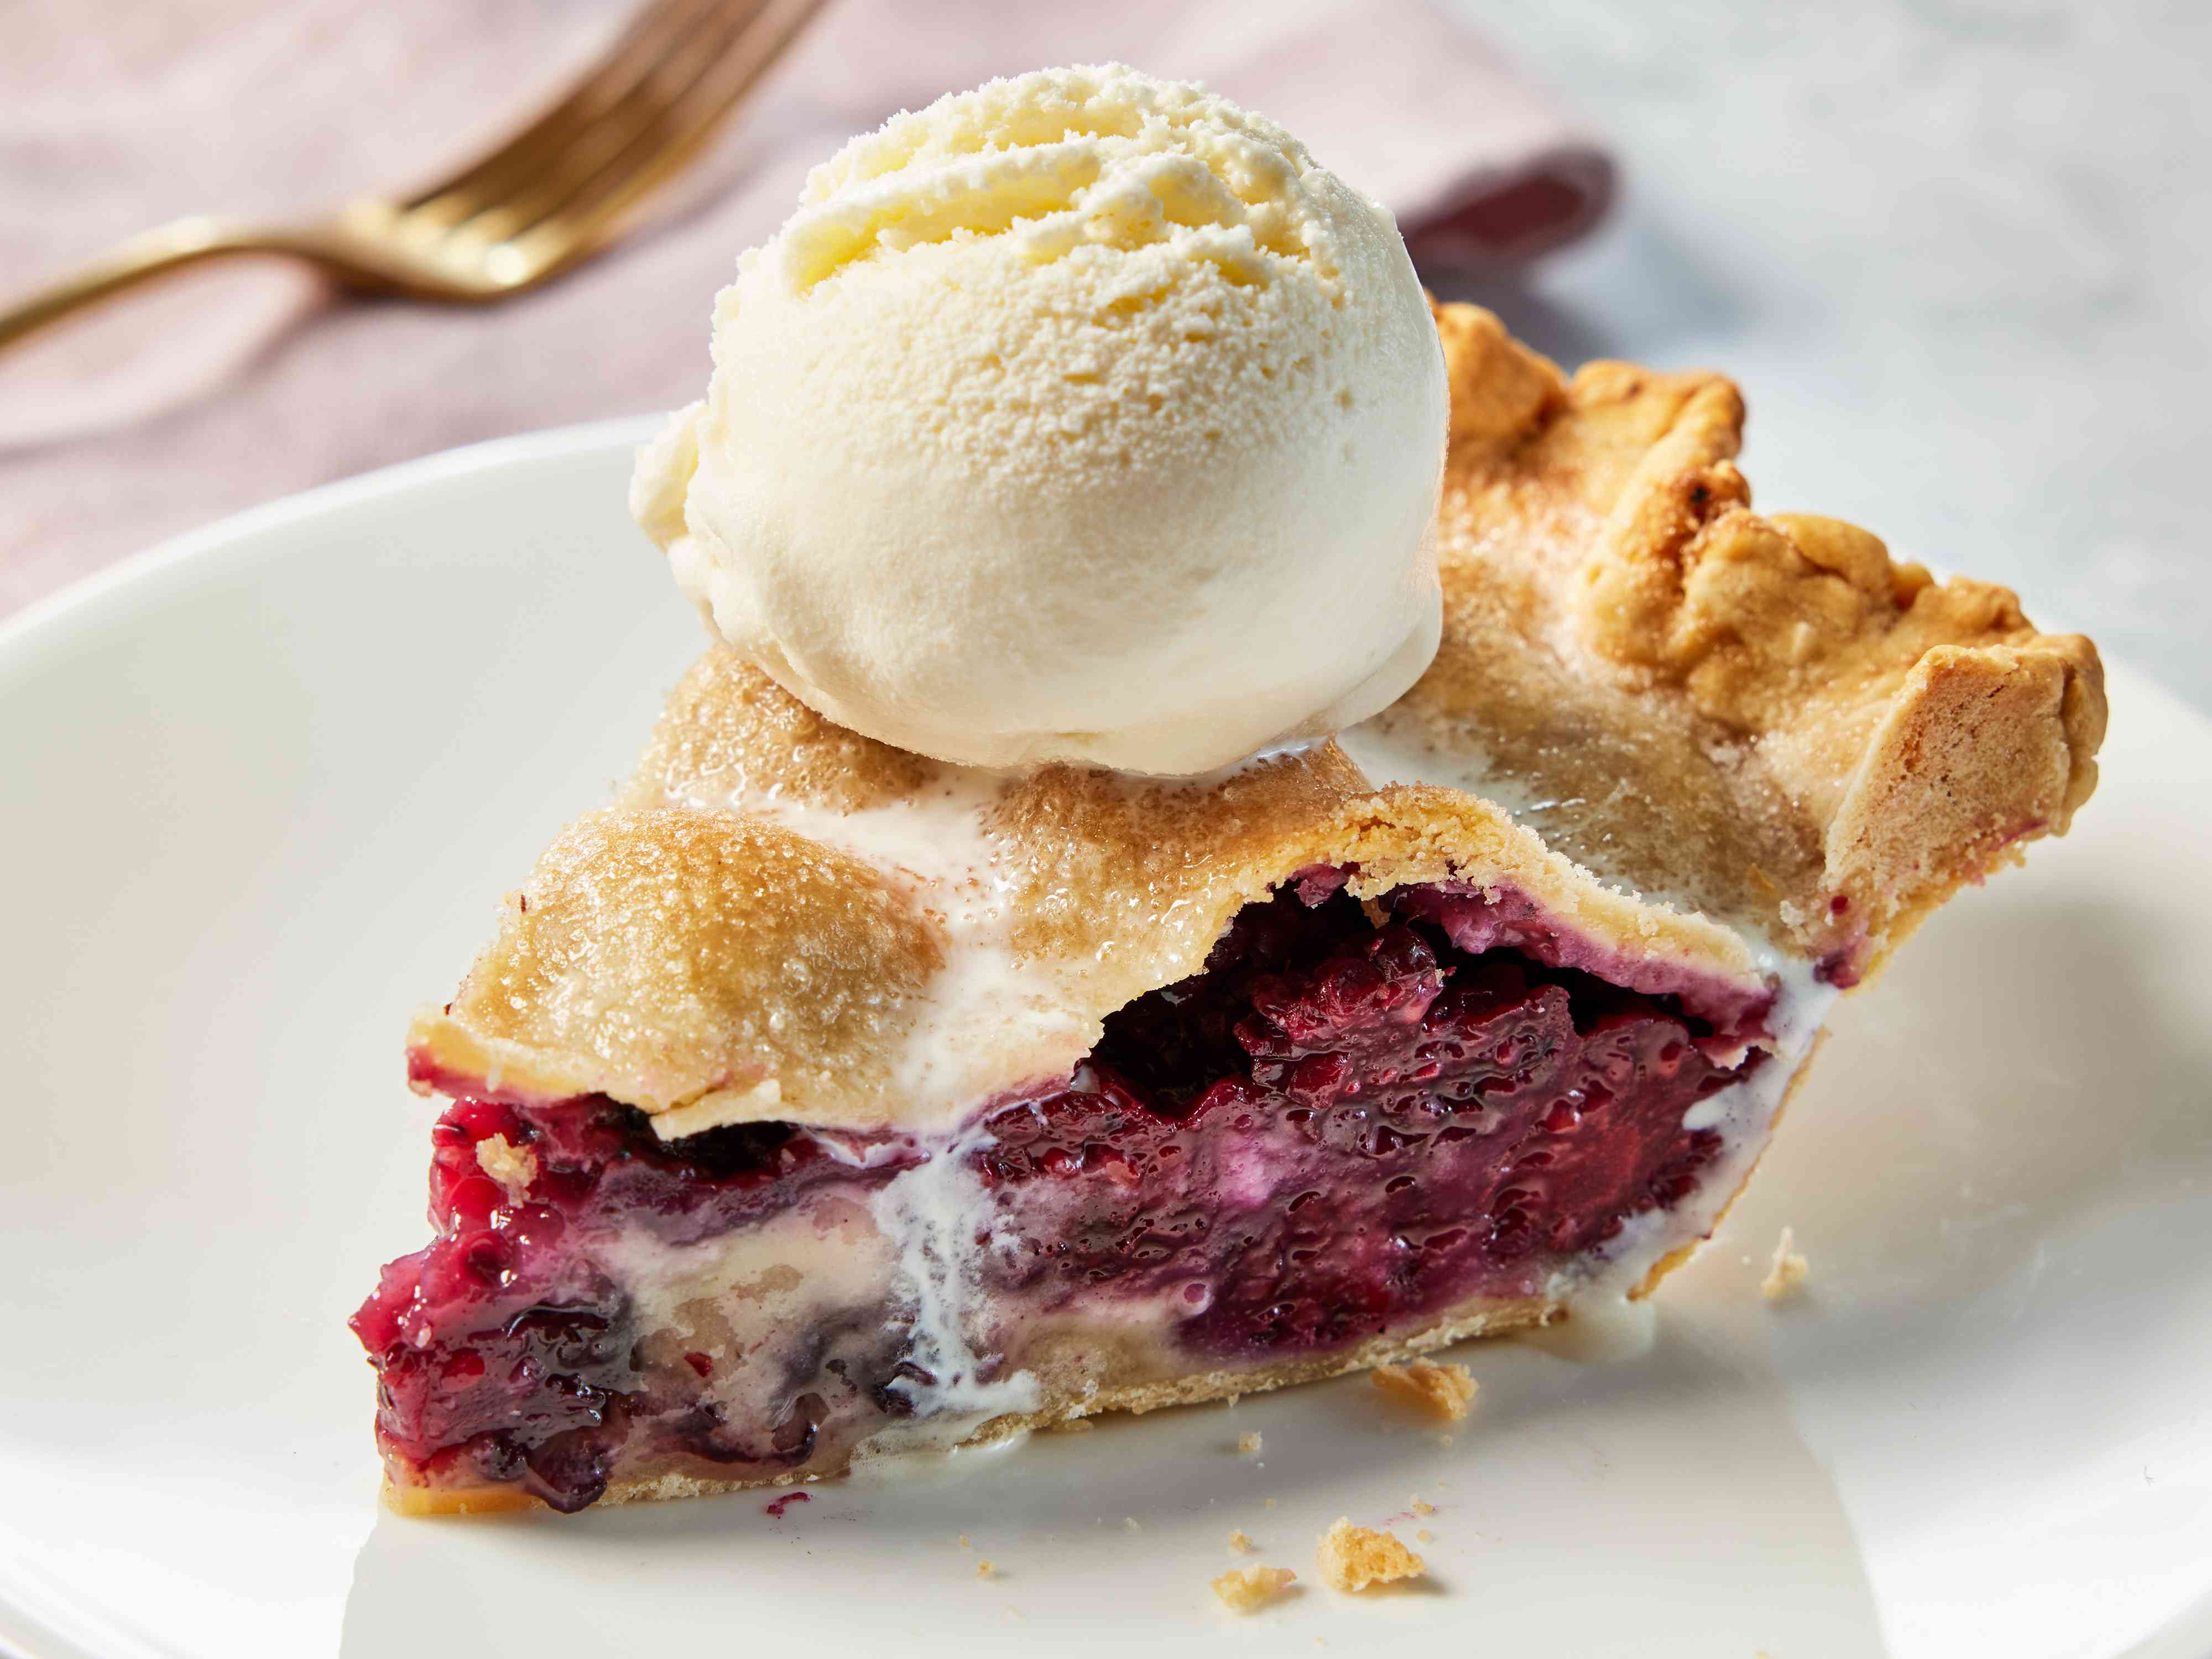 Our 20 Best Summer Pie Recipes to Satisfy Your Sweet Tooth This Season